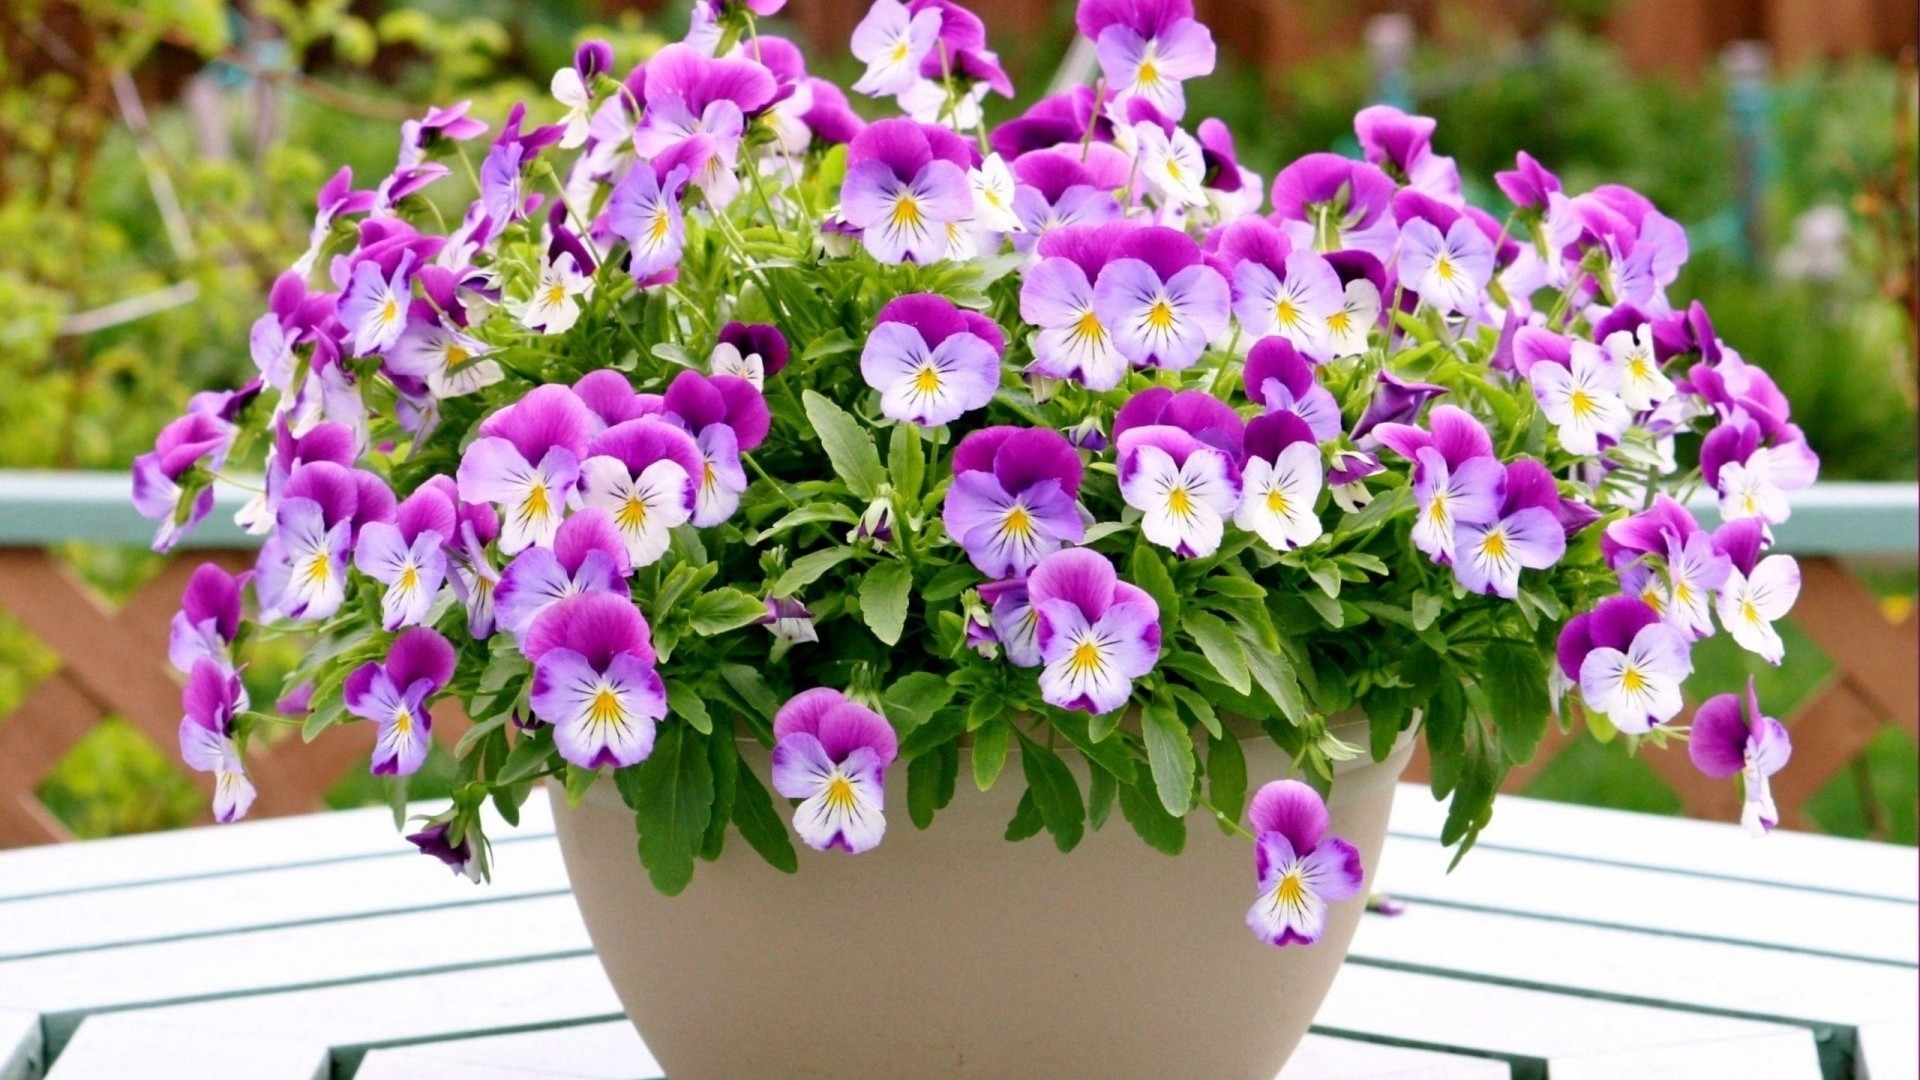 Pansies in a Vase  for 1920 x 1080 HDTV 1080p resolution